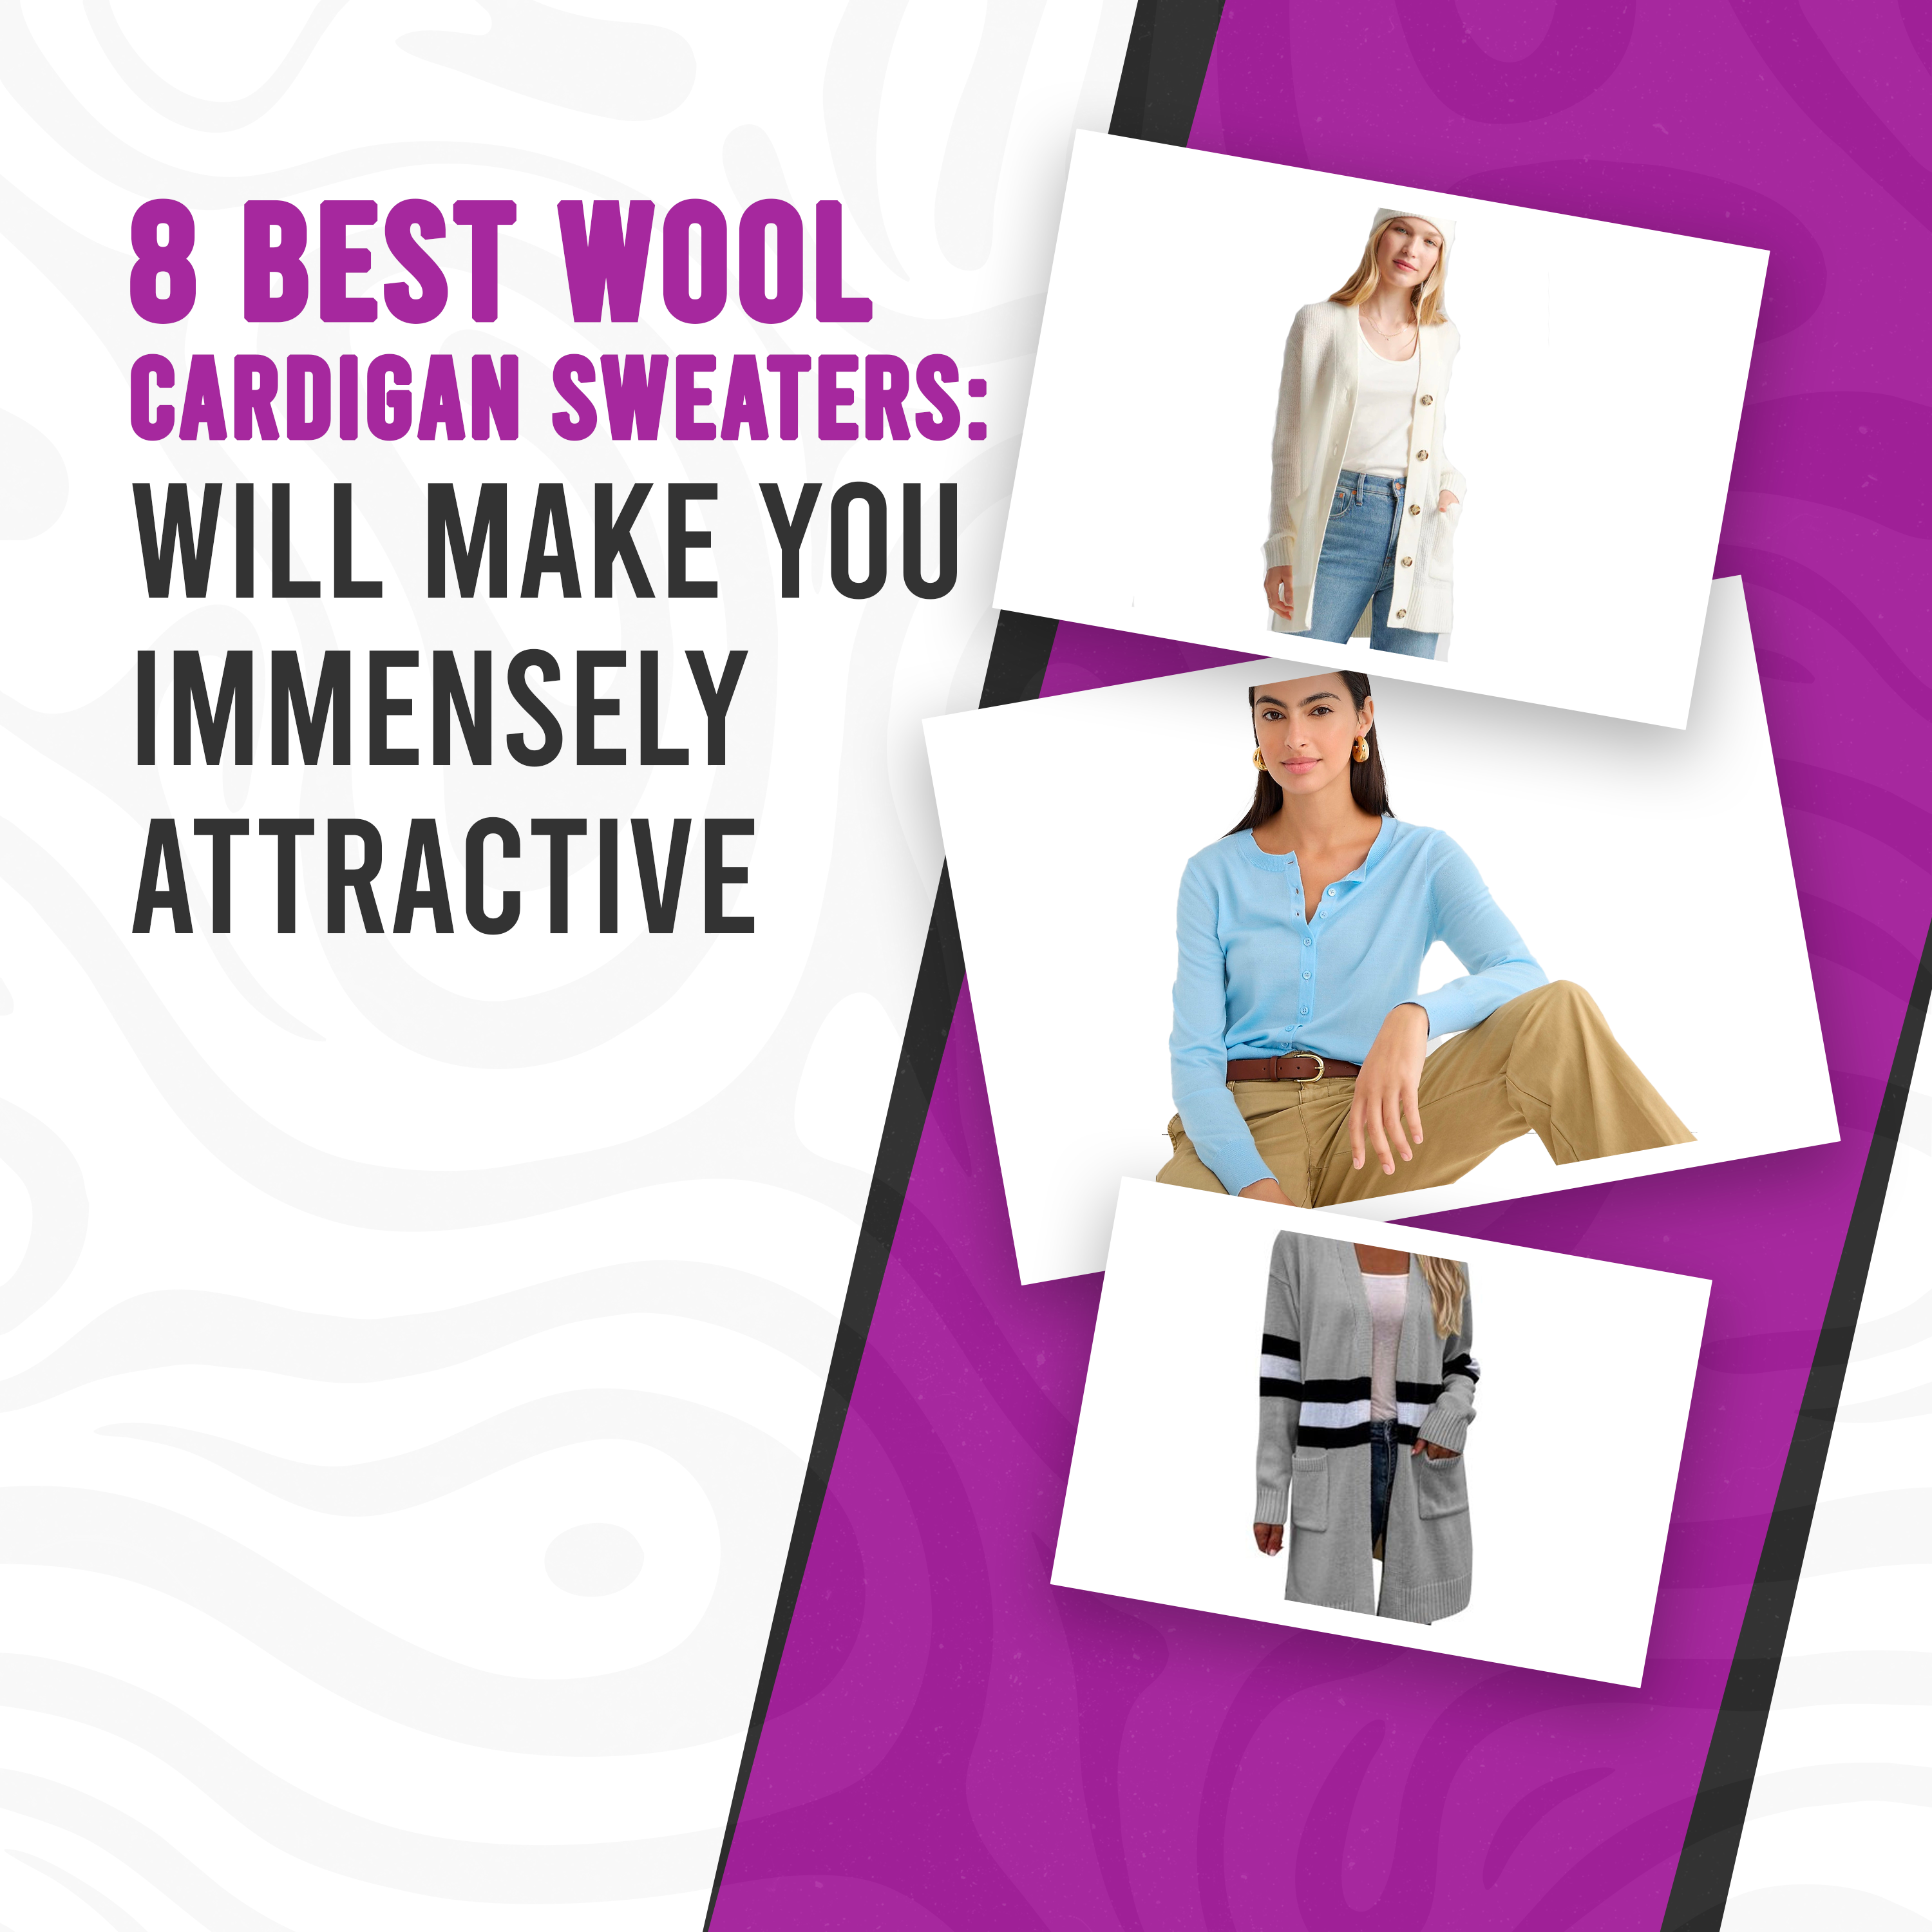 8 Best Wool Cardigan Sweaters: Will Make You Immensely Attractive